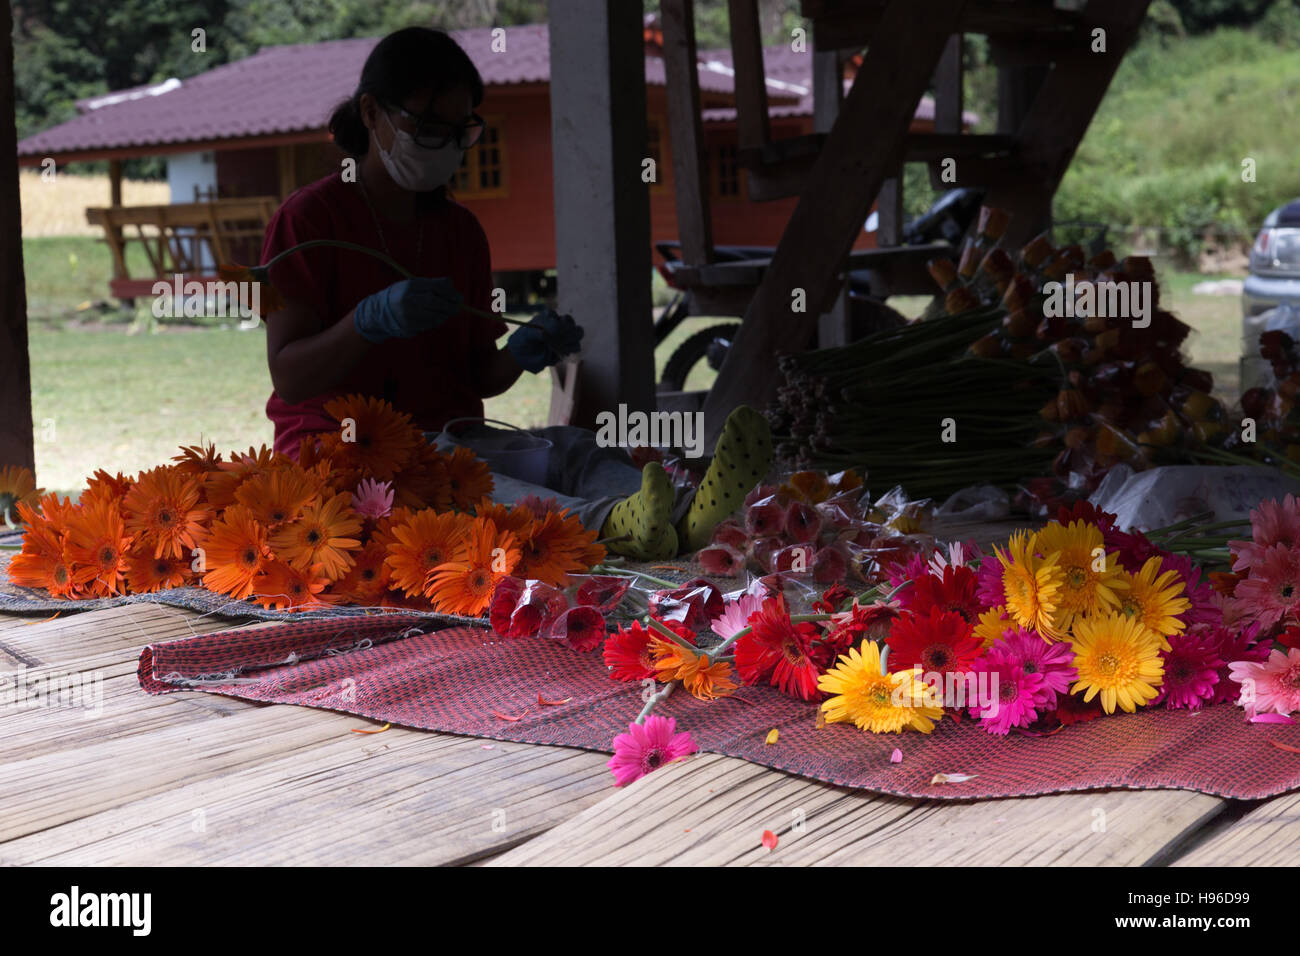 Chiang Mai, Thailand - November 4, 2016: woman arranging and tendering flowers for sale in Baan Mae Klang Luang in Chiang Mai, Thailand on November 4, Stock Photo